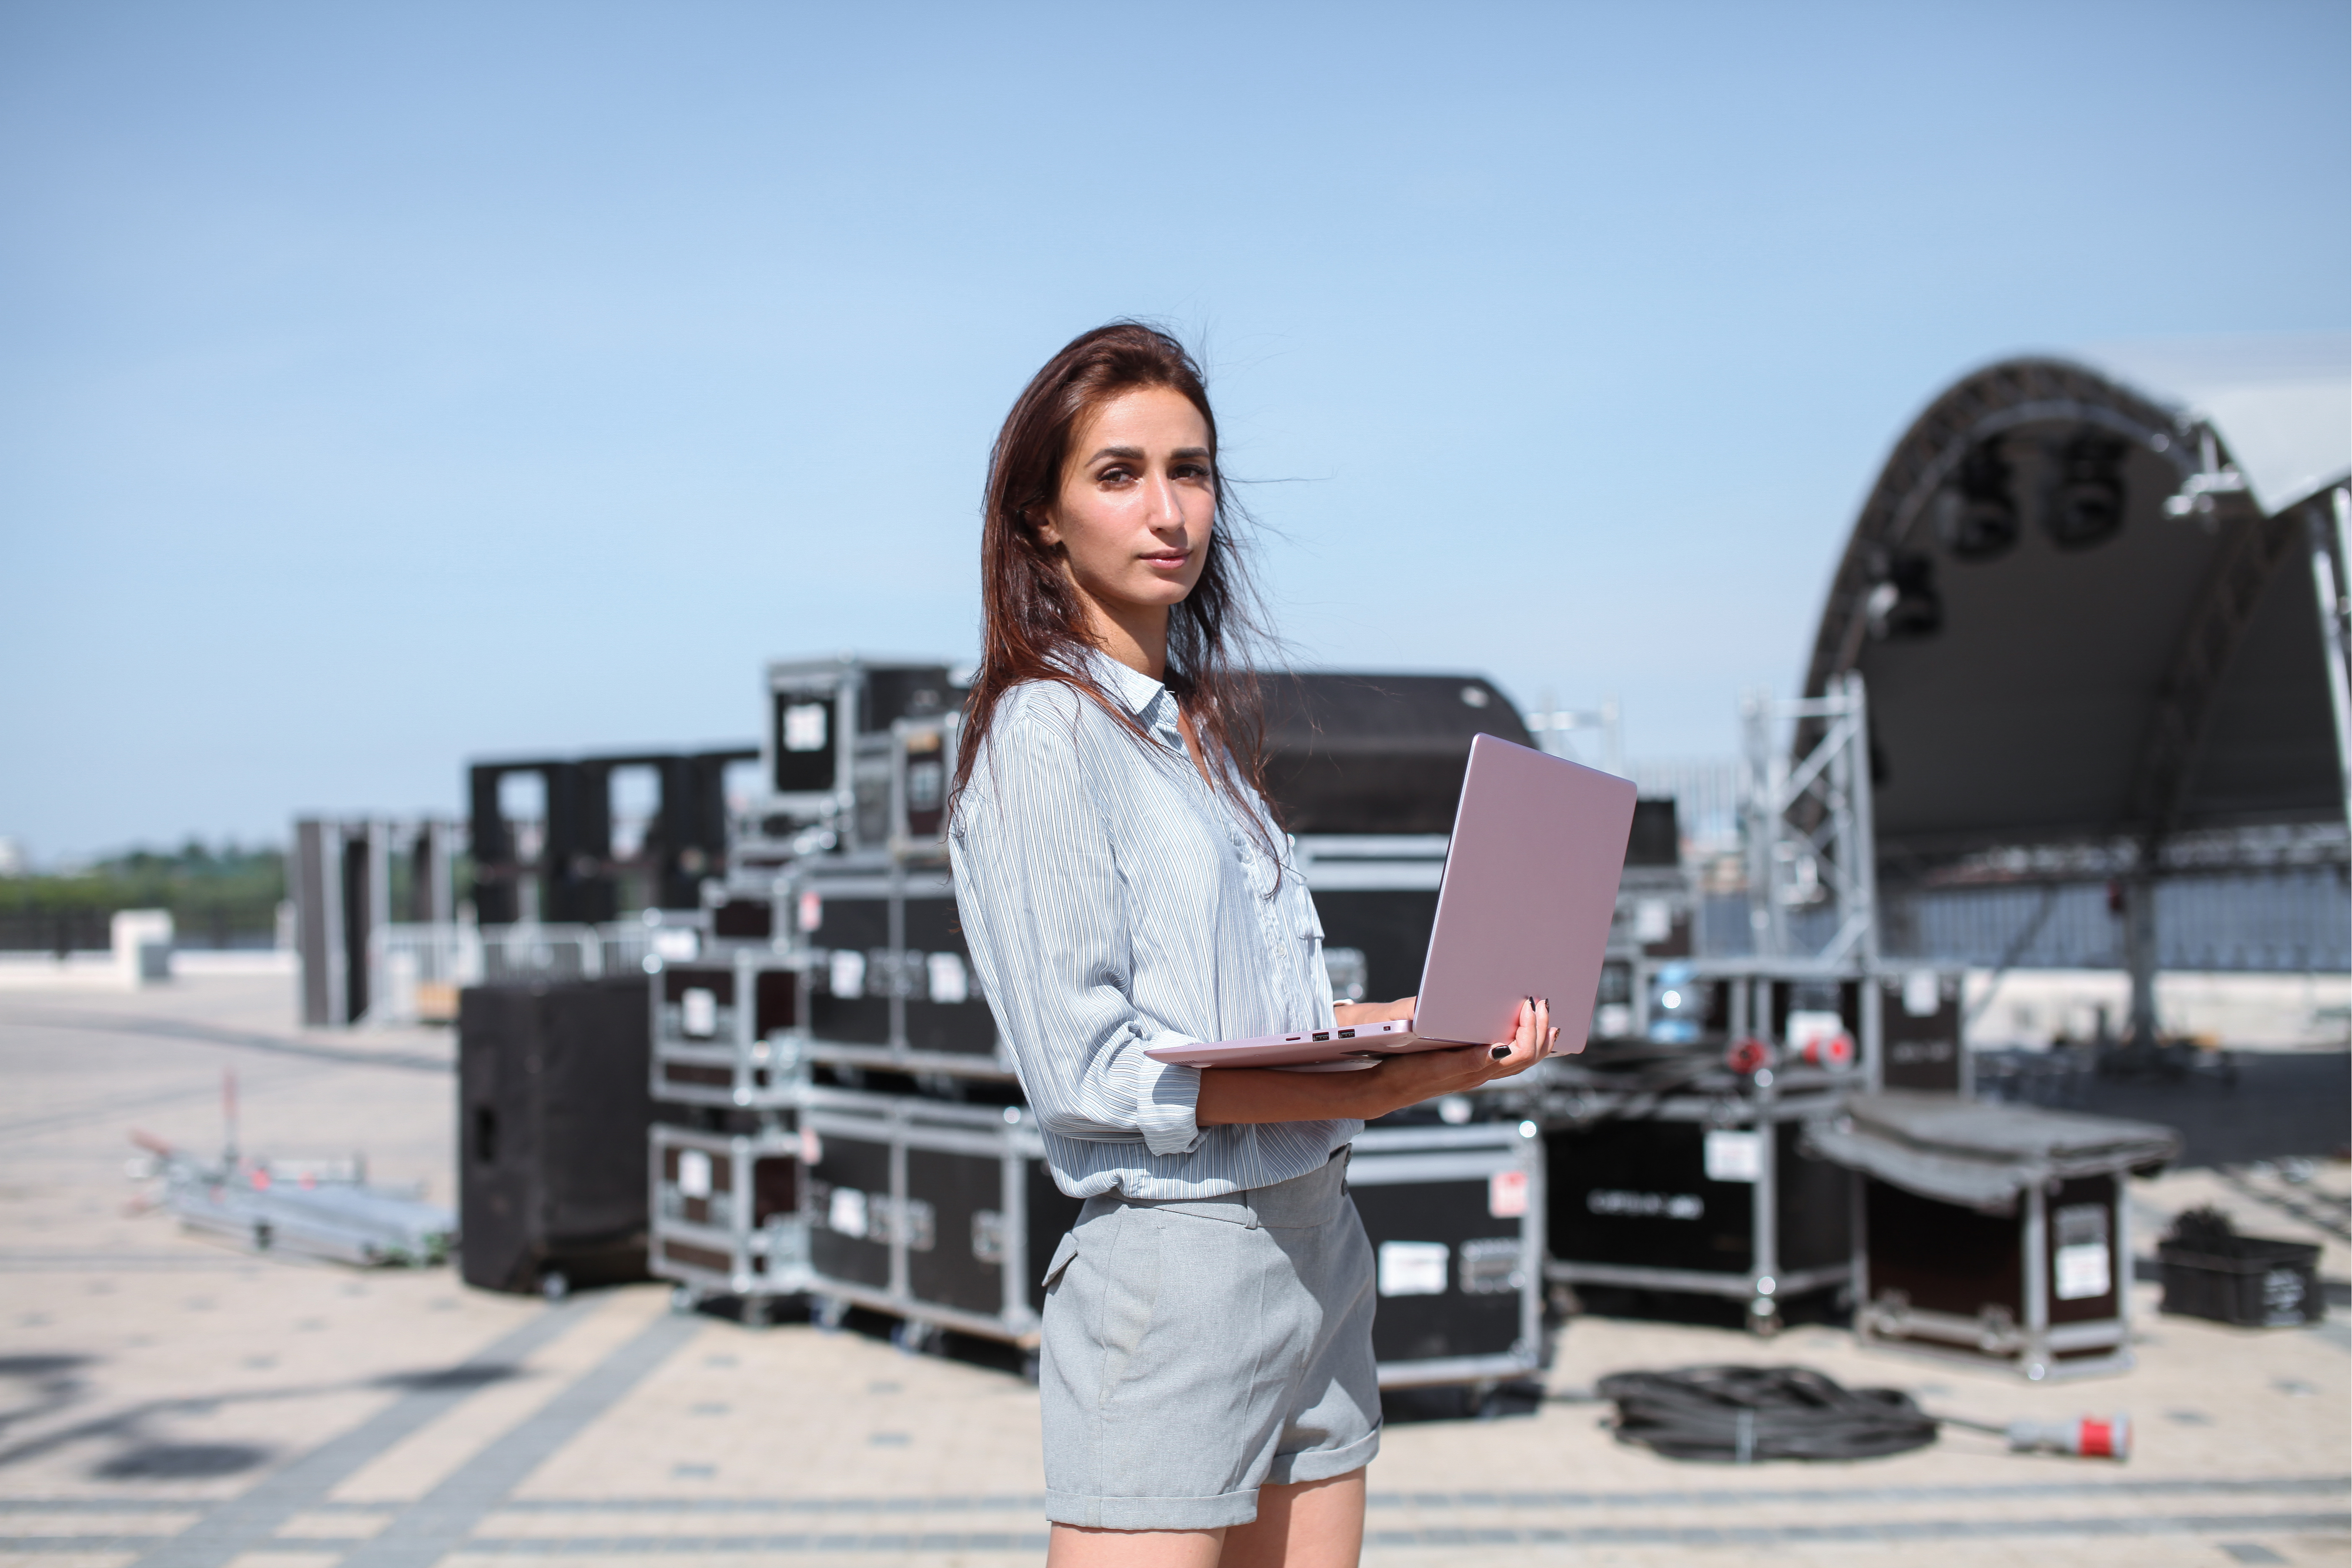 Festival software helps you stay organized